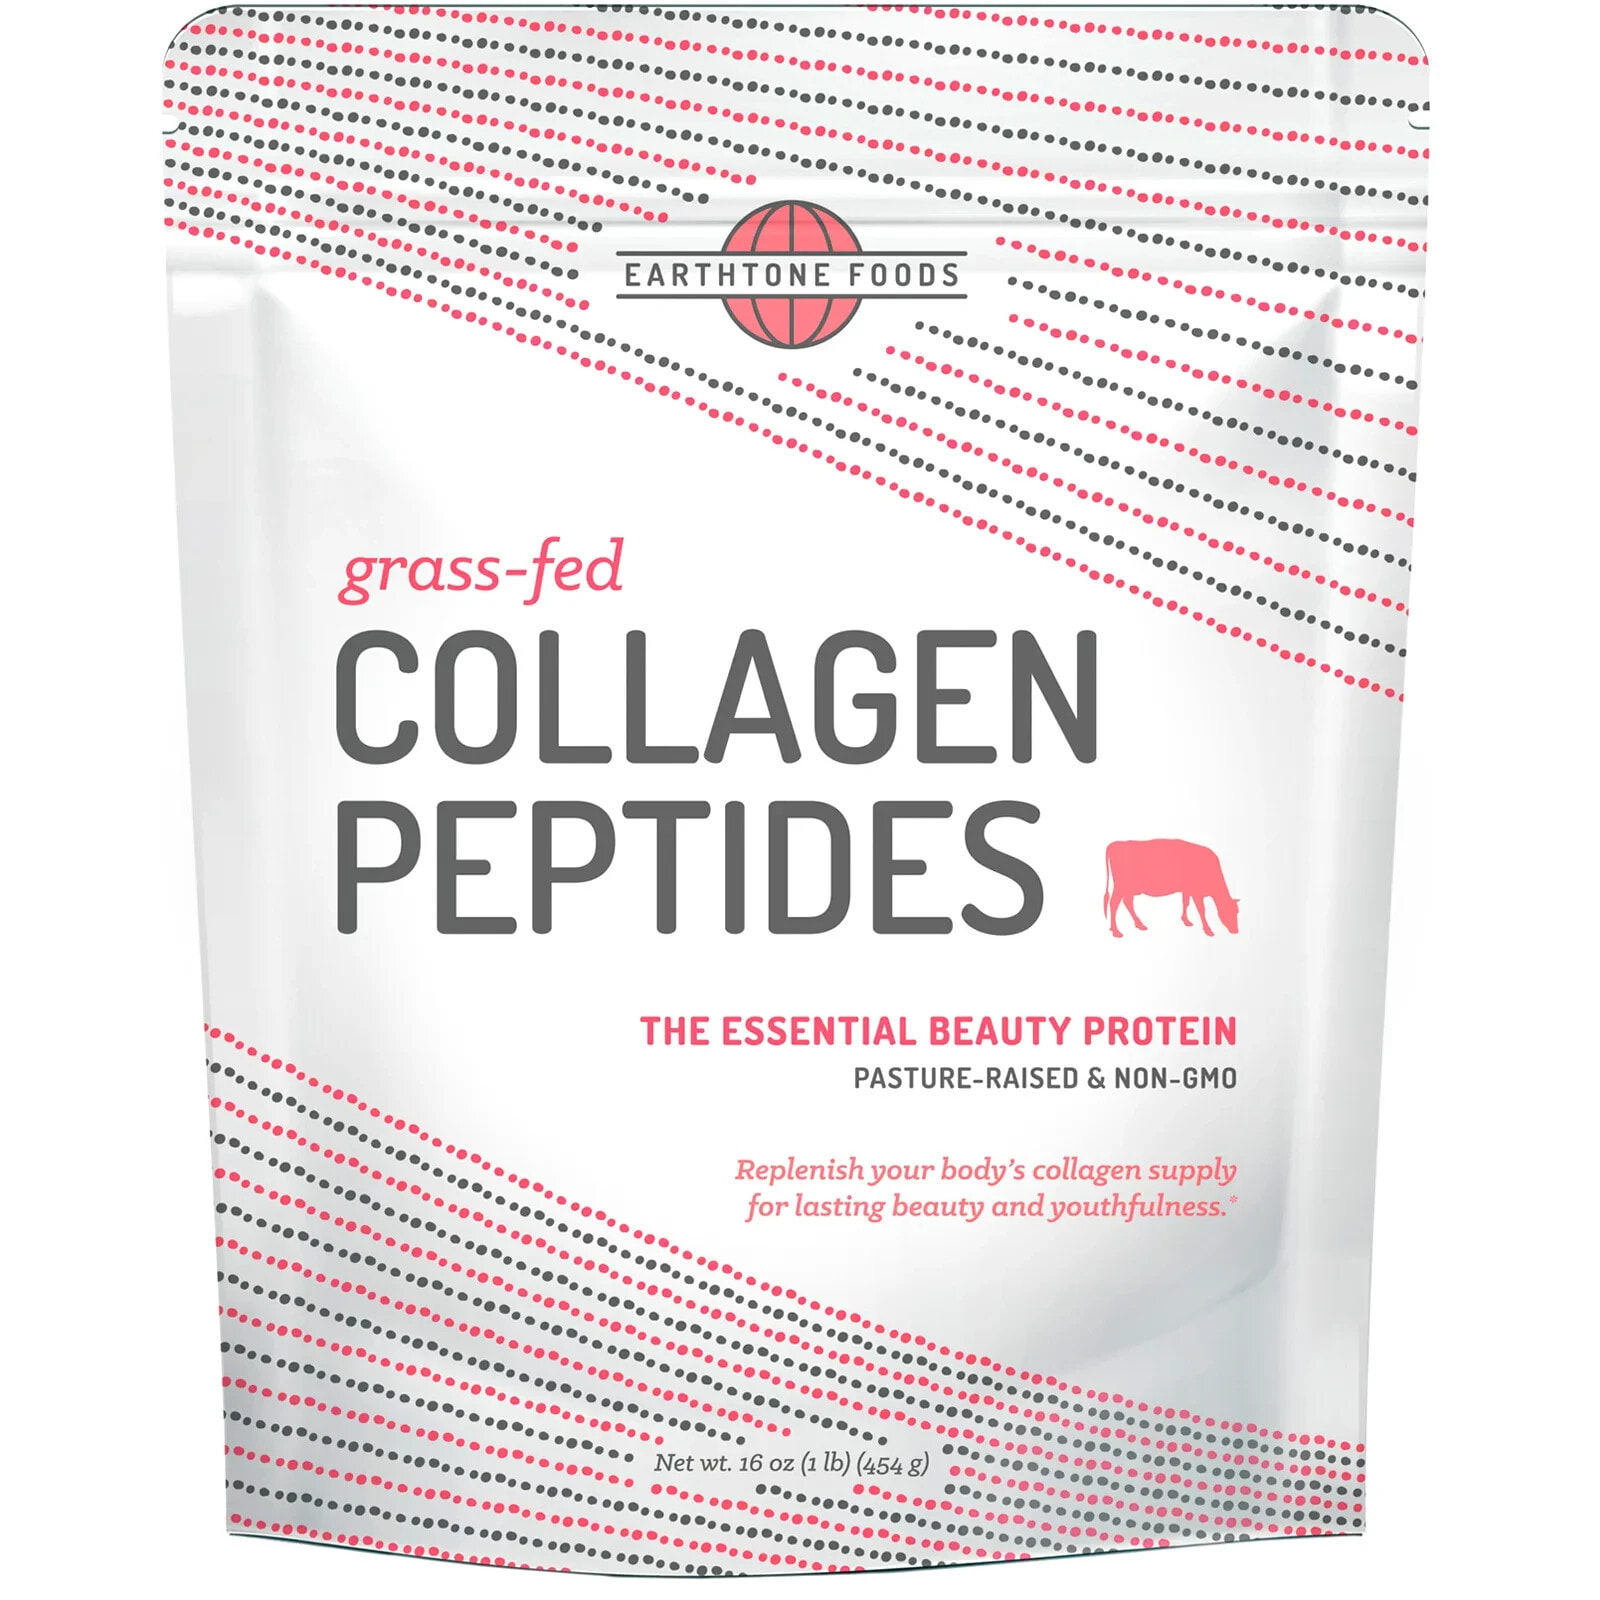 Collagen Peptides Earthtone foods. Grass Fed коллаген Peptides. Collagen Peptides — «коллаген Пептидс». Collagen Peptides порошок.